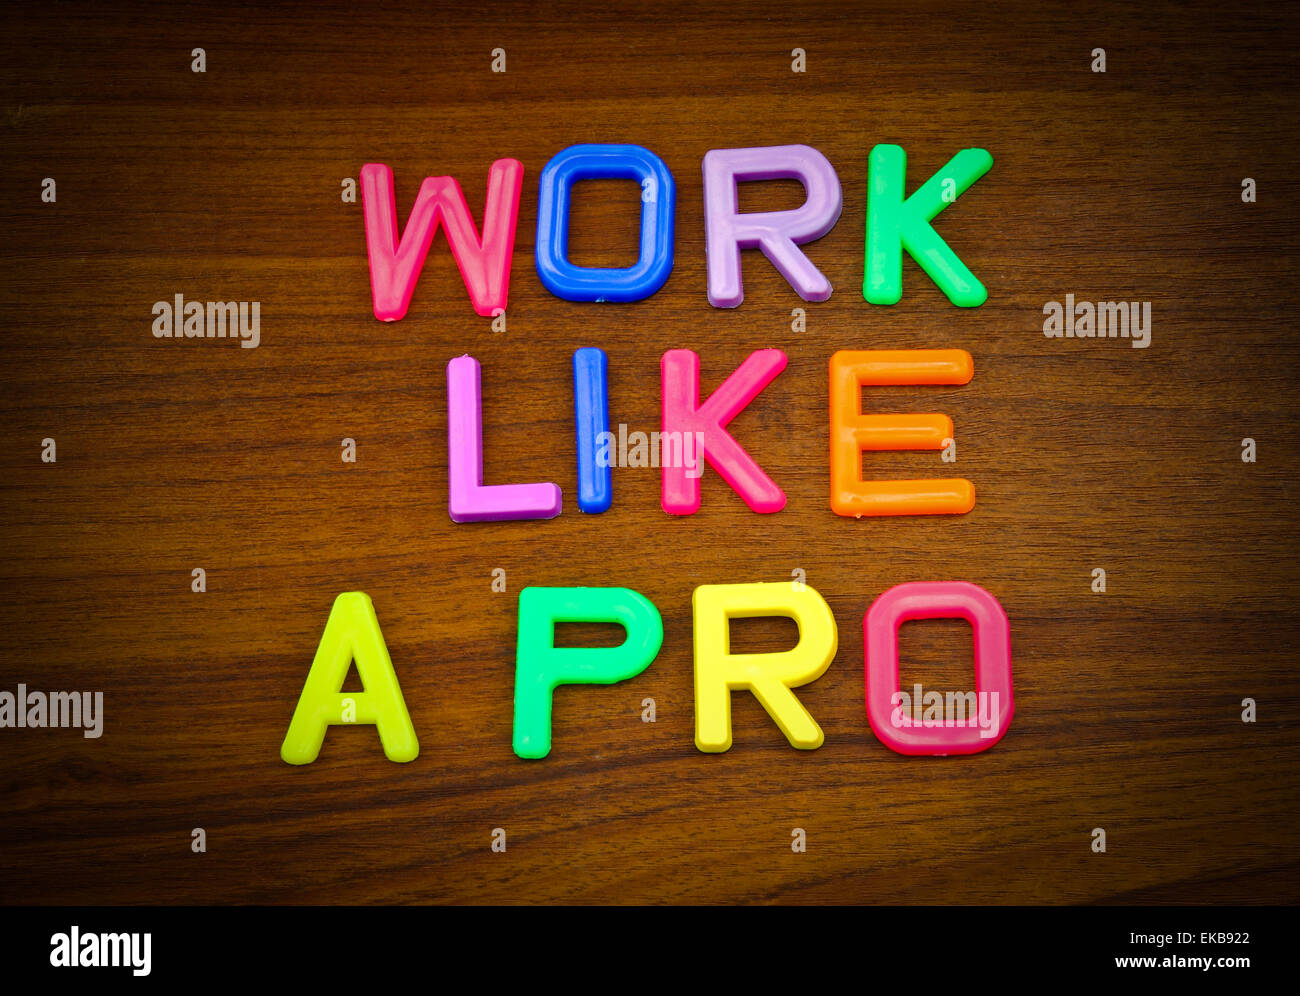 Work like a pro in colorful toy letters on wood background Stock Photo